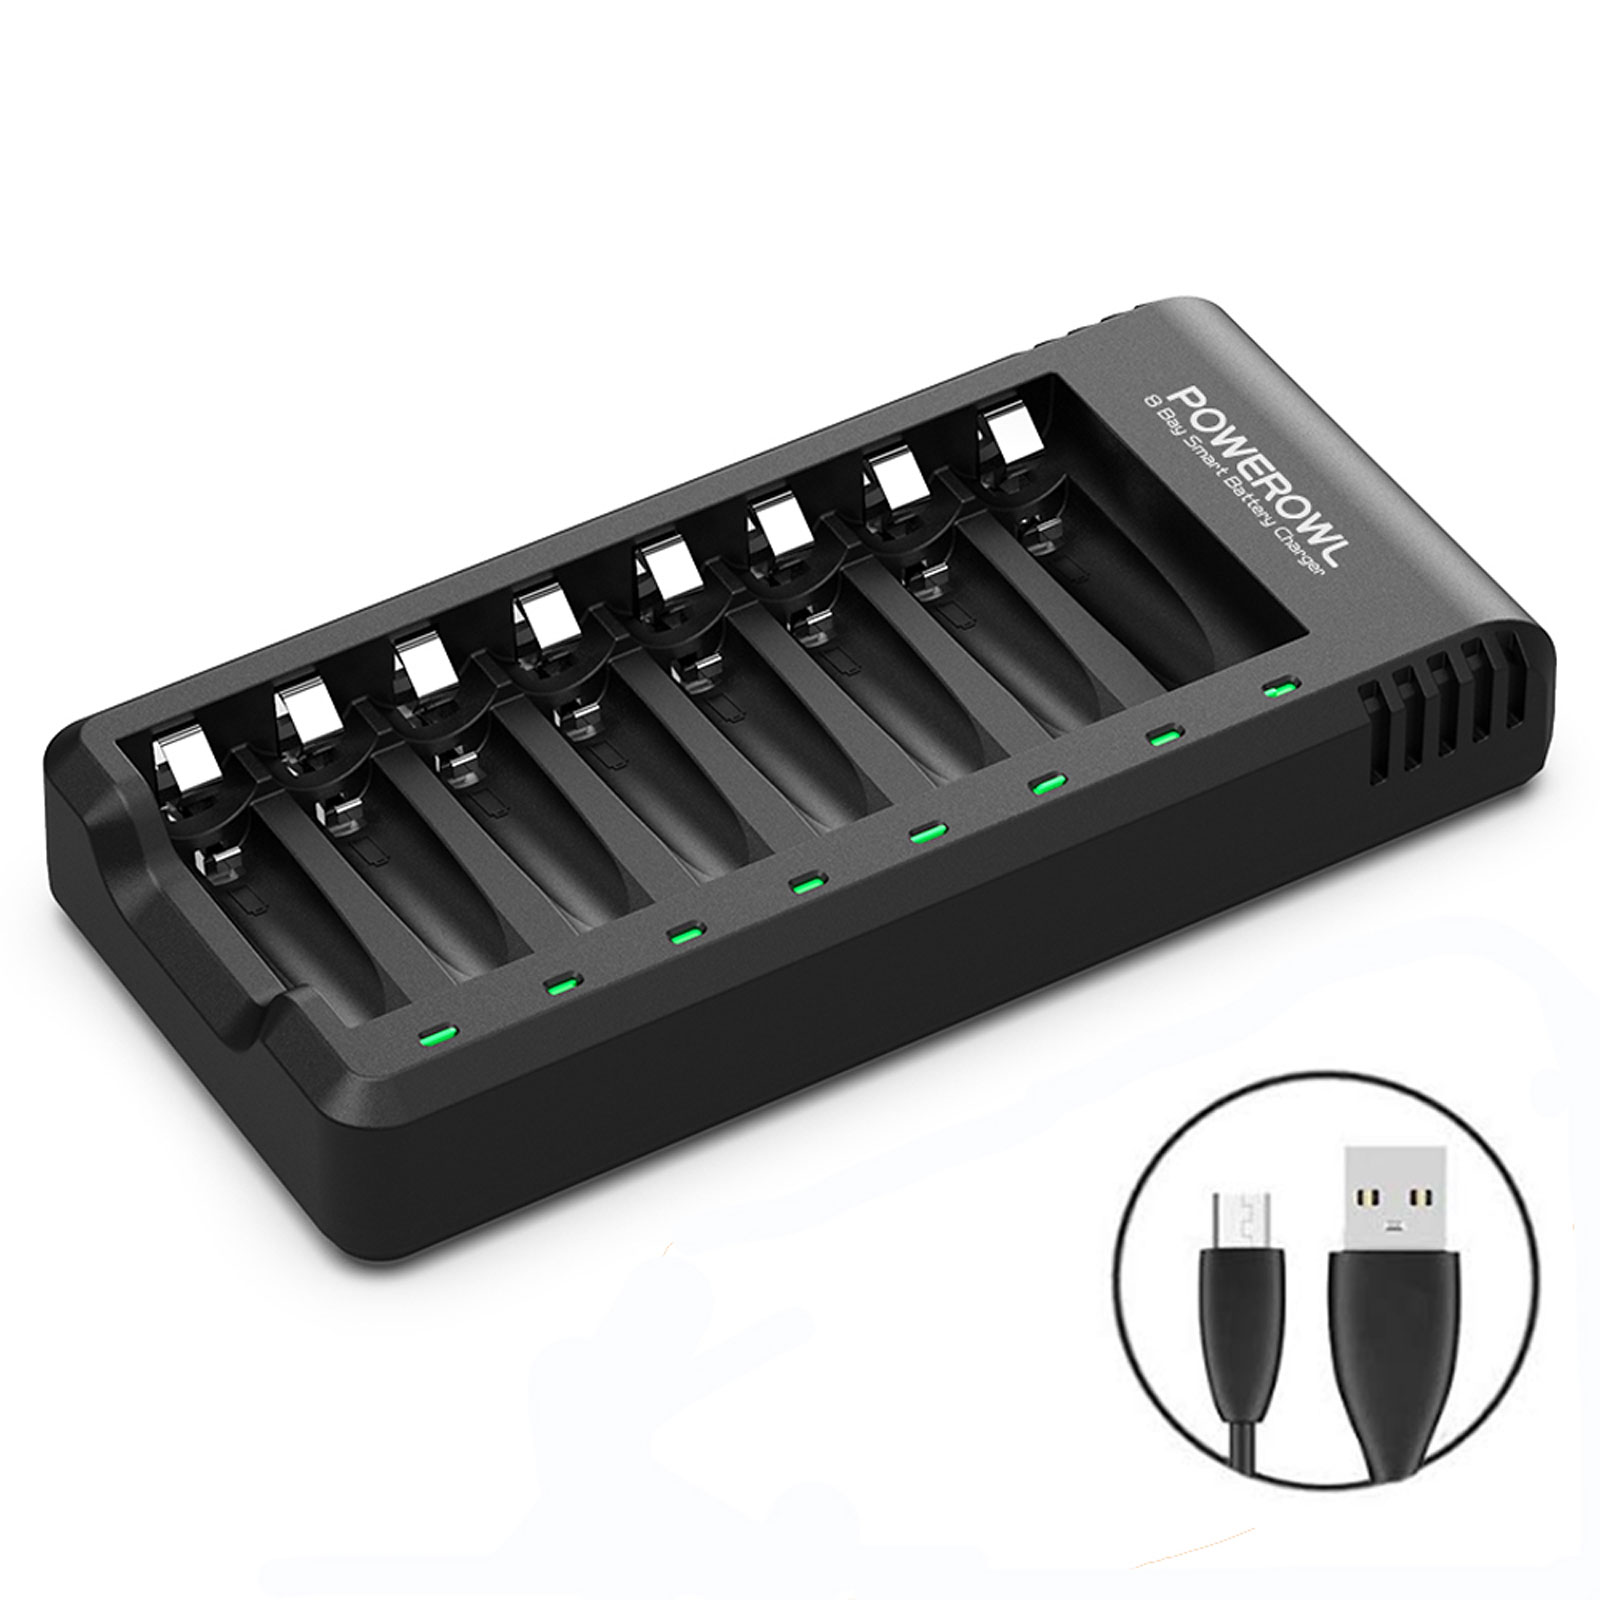 POWEROWL 8 Bay AA AAA Battery Charger, USB High-Speed Charging, for Ni-MH Ni-CD Rechargeable Batteries, No Adapter